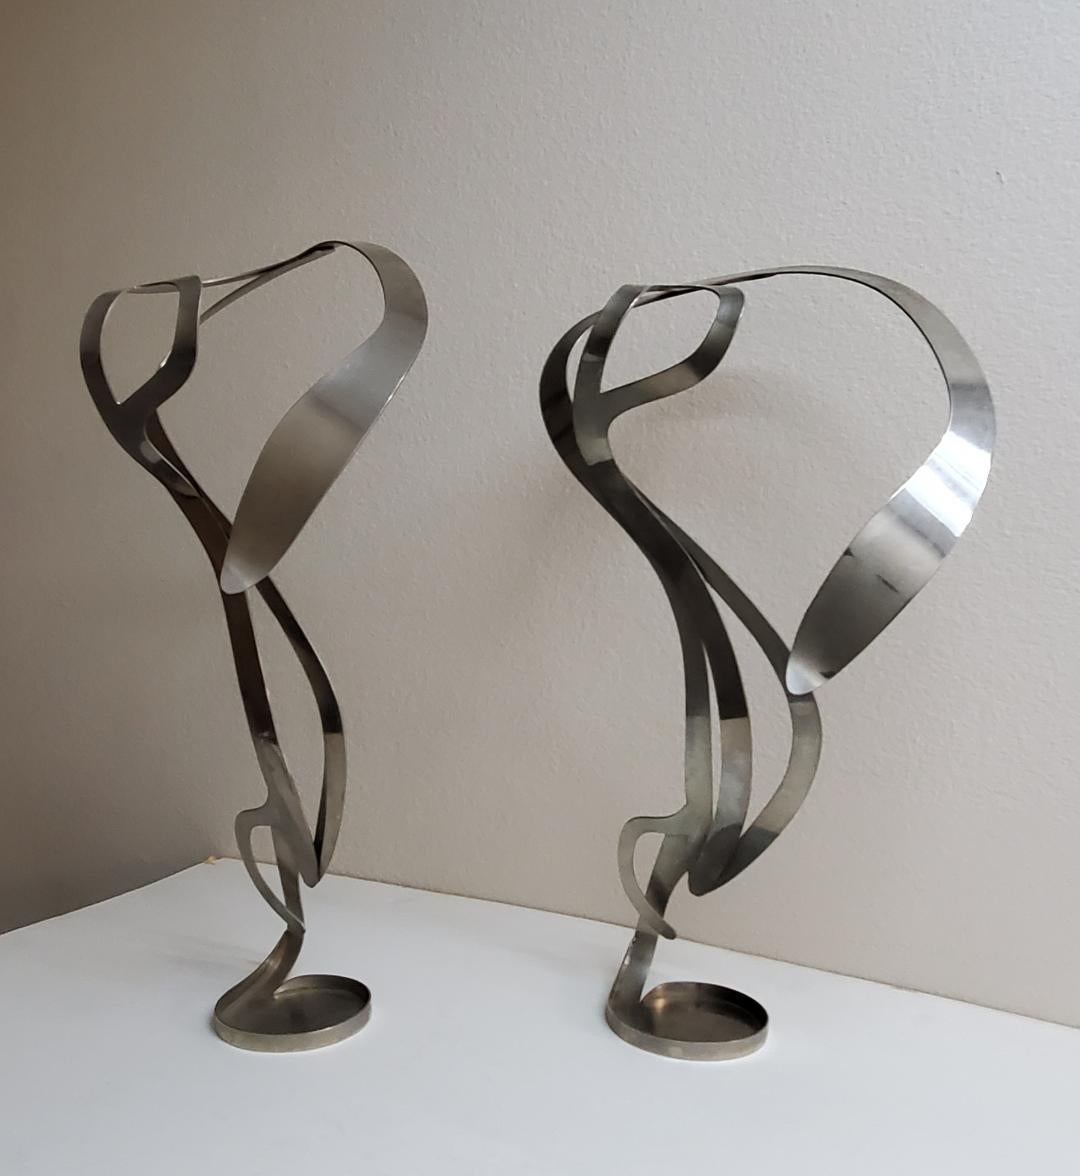 2 Art Nouveau Styled Candle Holders Crafted Into Swirling Twirling Metal Smoke  For Sale 10